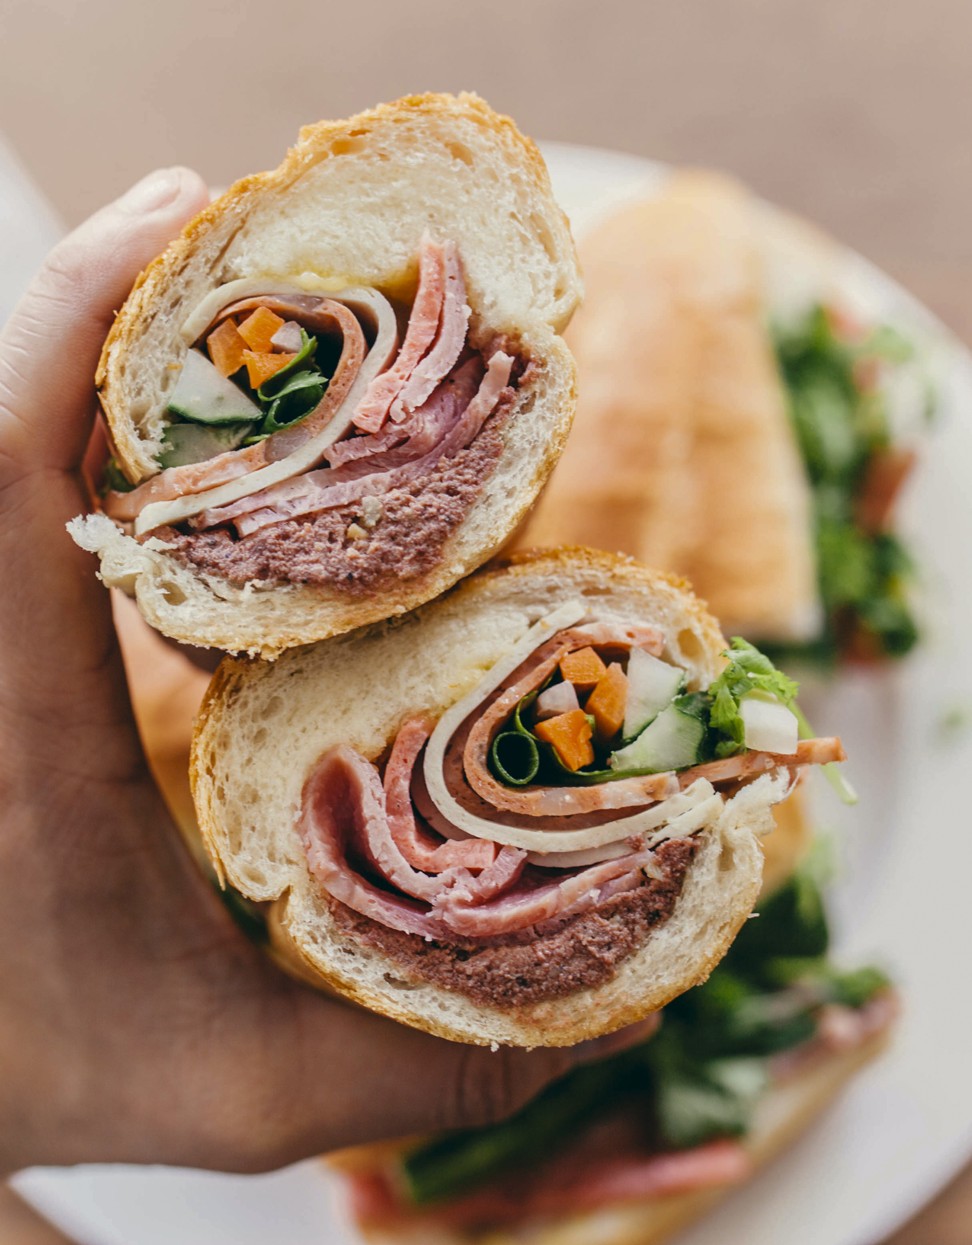 Banh mi at Co Thanh in Central. Photo: Bernice Chan